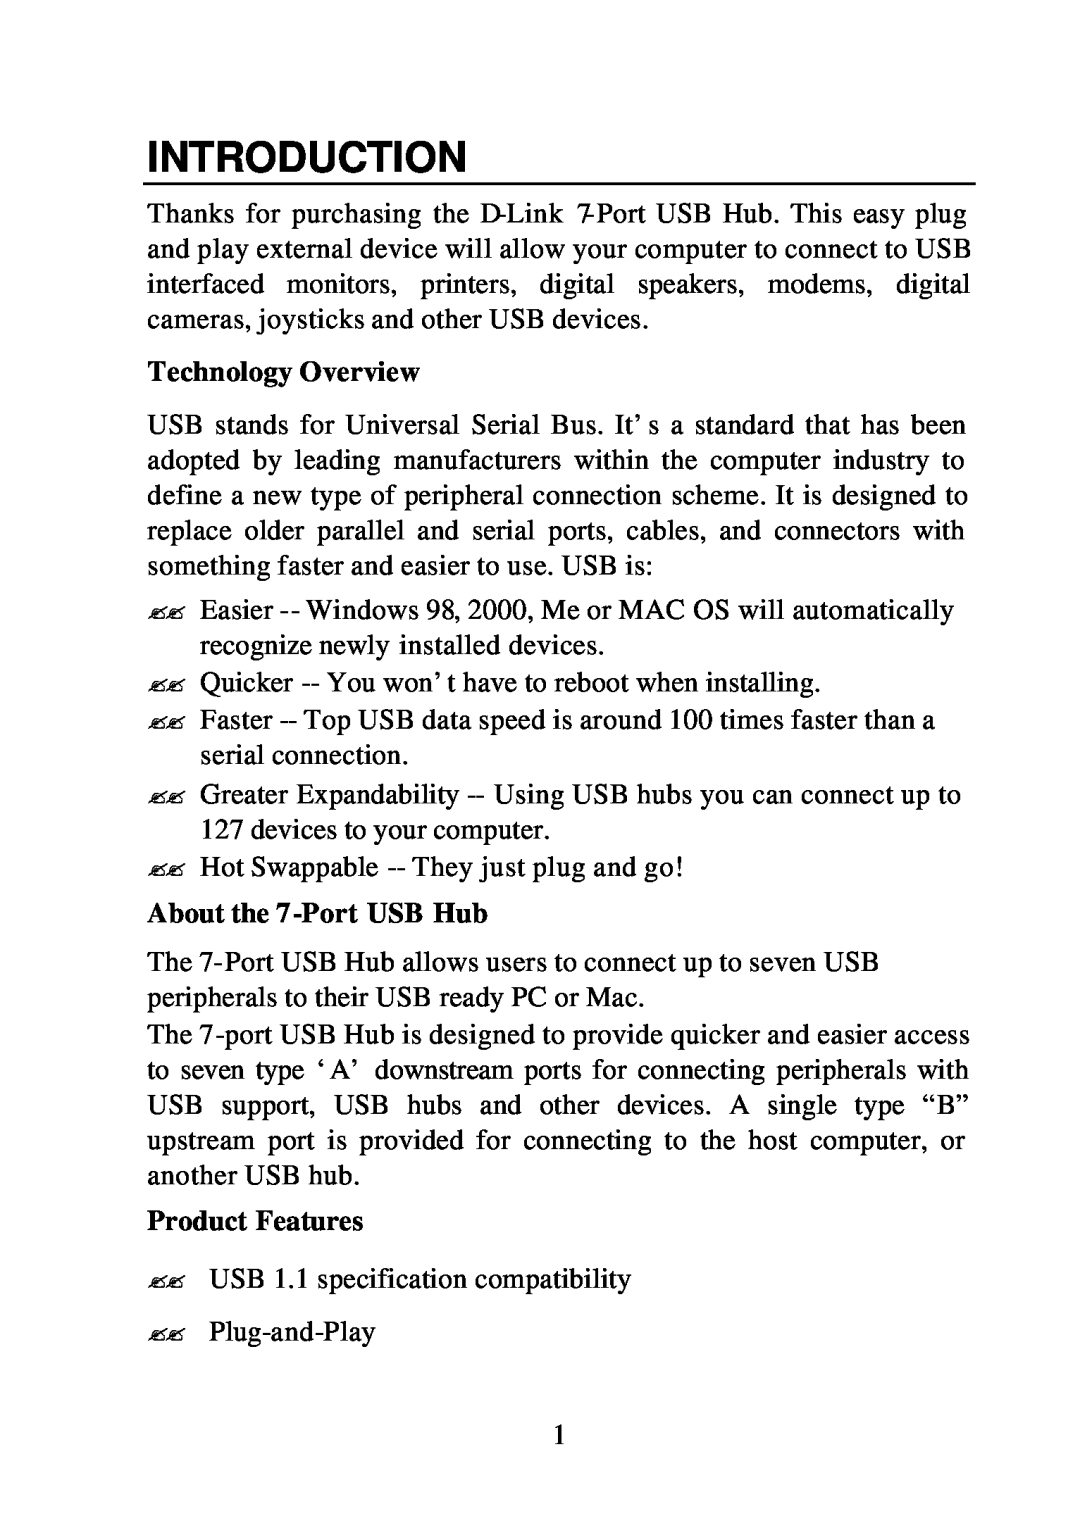 D-Link DU-H7 user manual Introduction, Technology Overview, About the 7-Port USB Hub, Product Features 